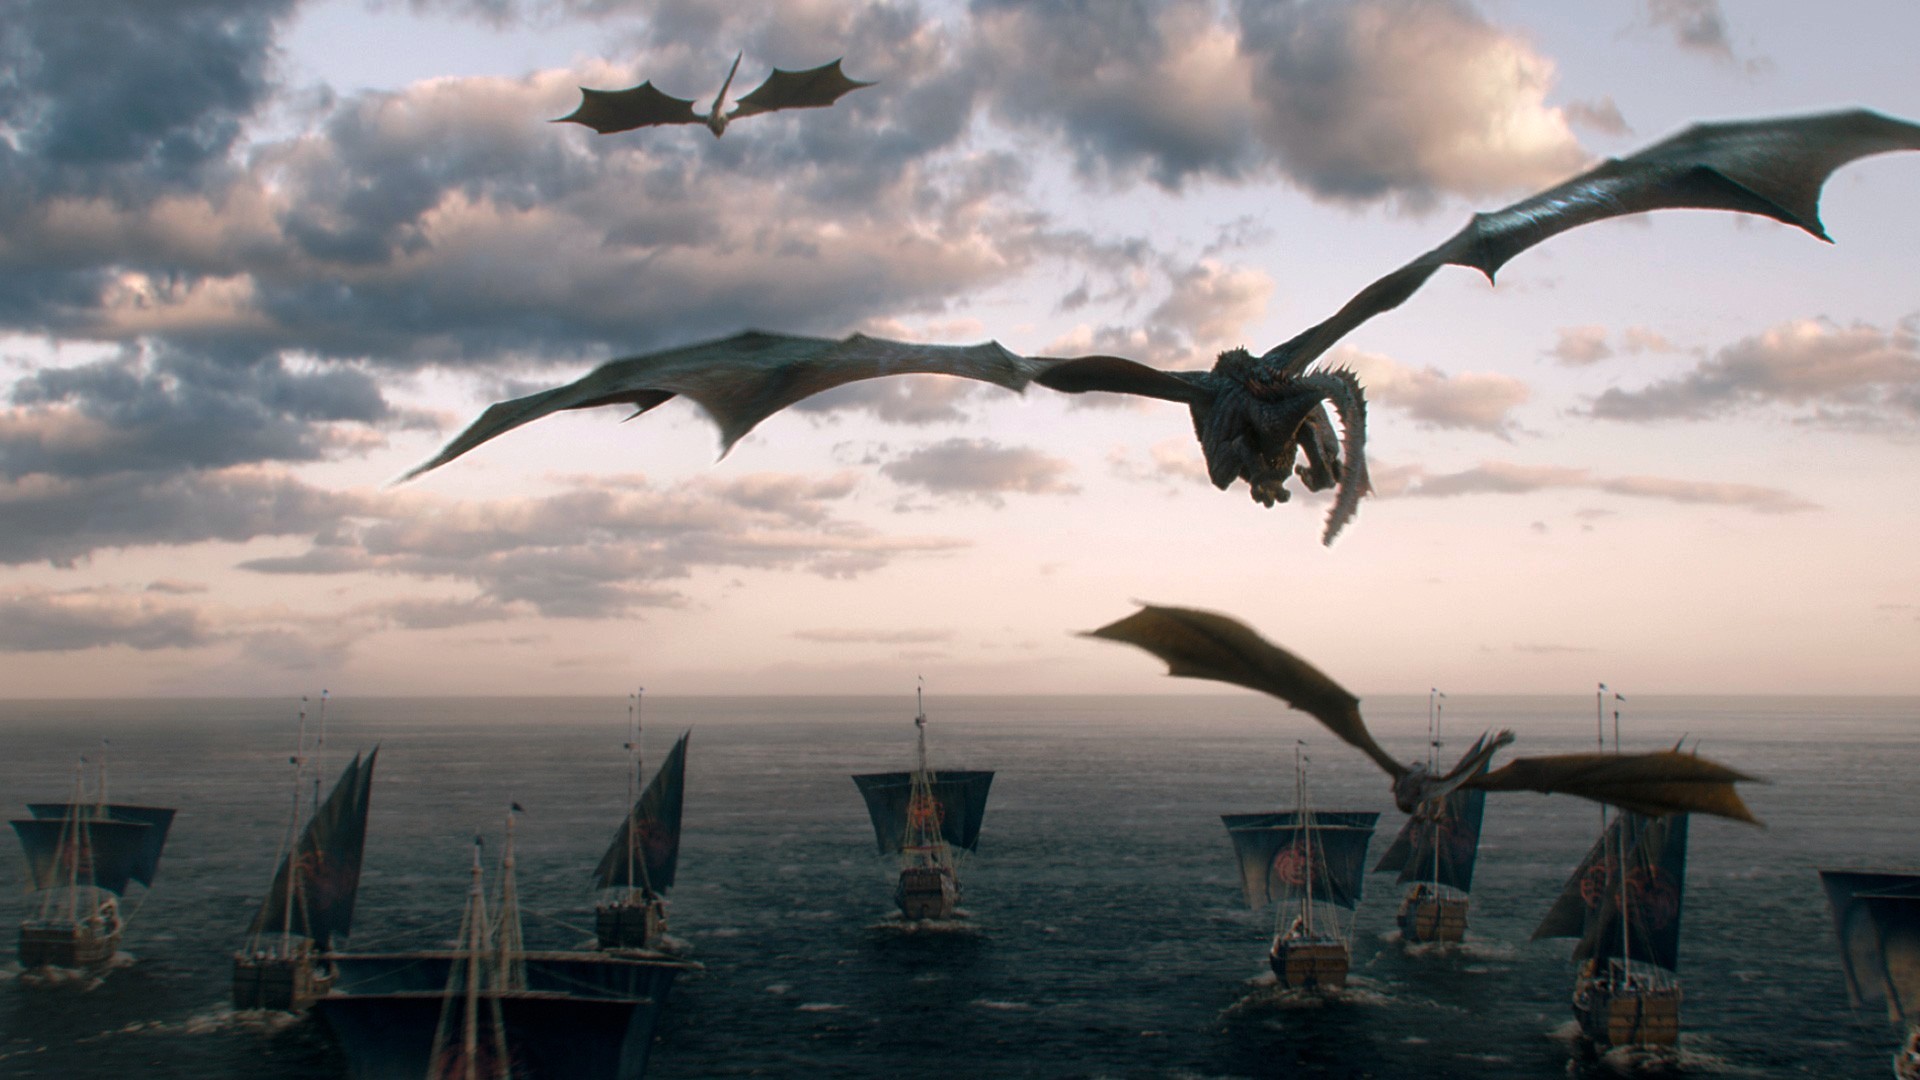 Game Of Thrones Dragons Wallpaper For Desktop With - HD Wallpaper 